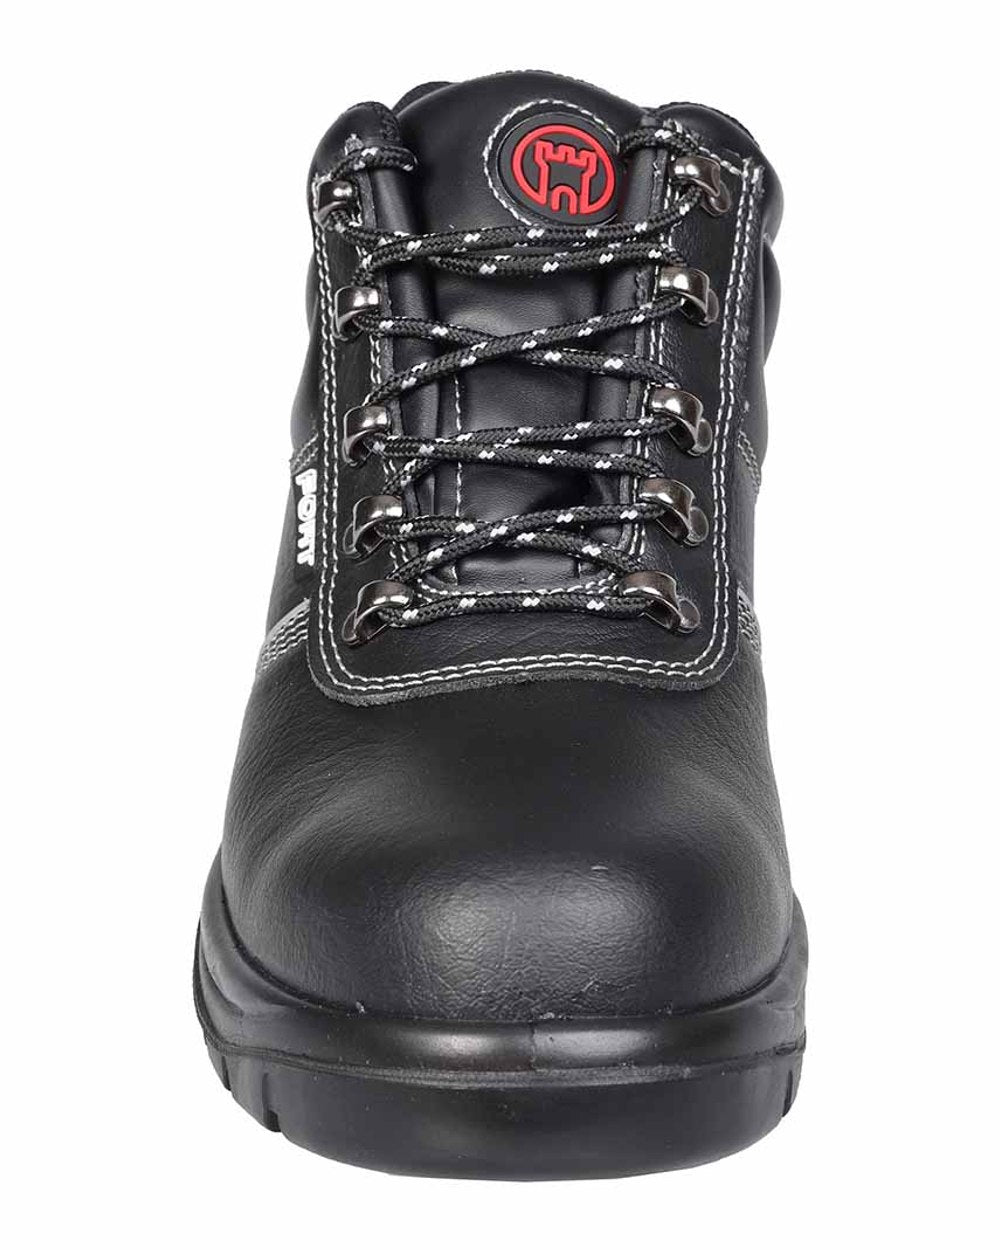 Black coloured Fort Workforce Safety Boots on white background 